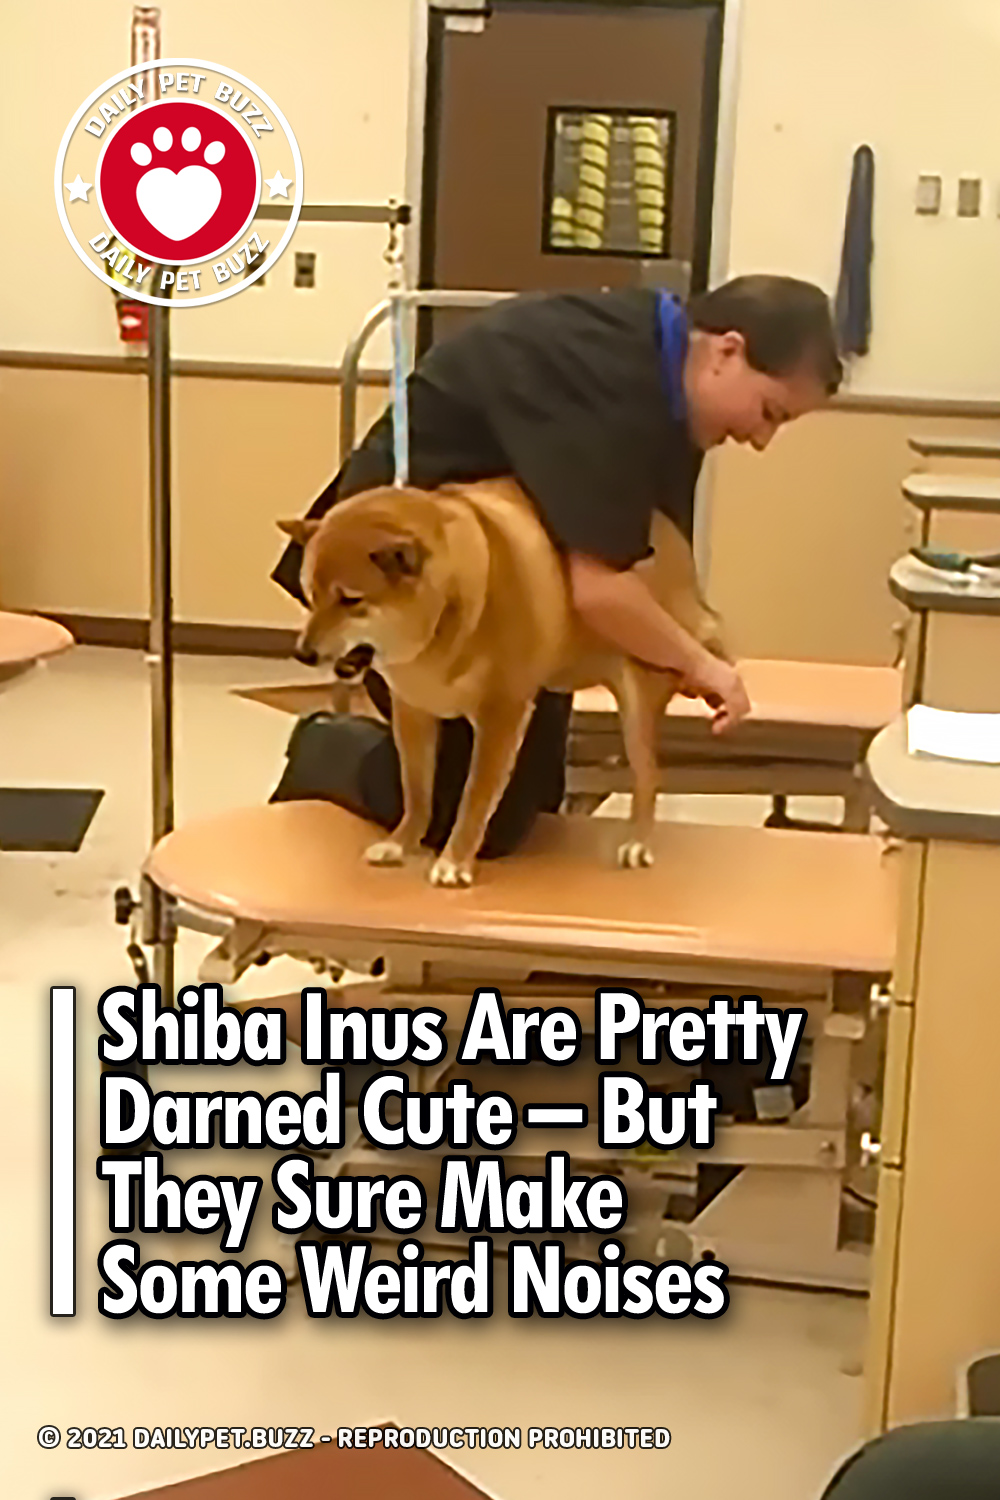 Shiba Inus Are Pretty Darned Cute – But They Sure Make Some Weird Noises